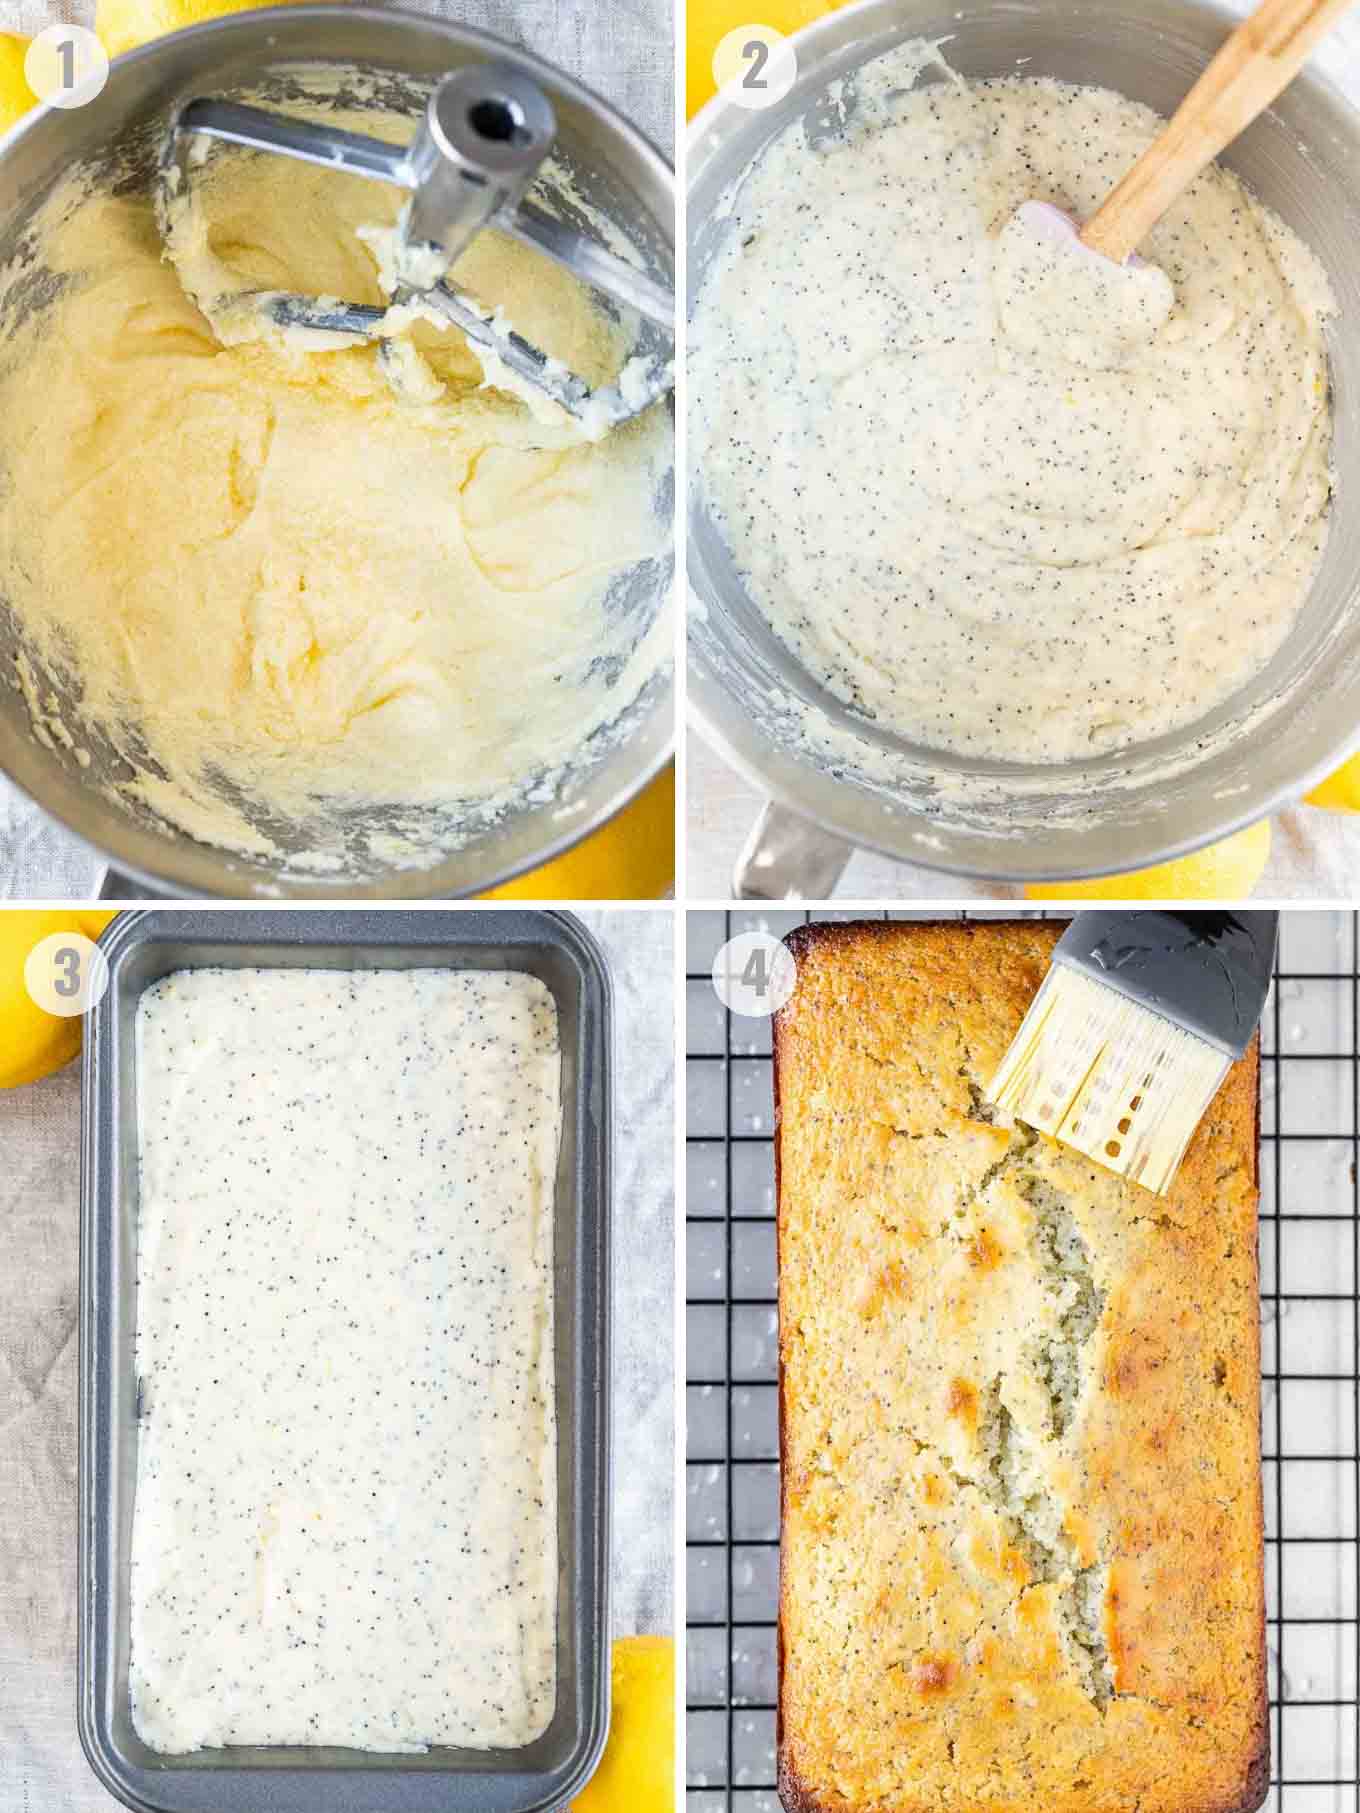 How to make lemon poppy seed bread collage.